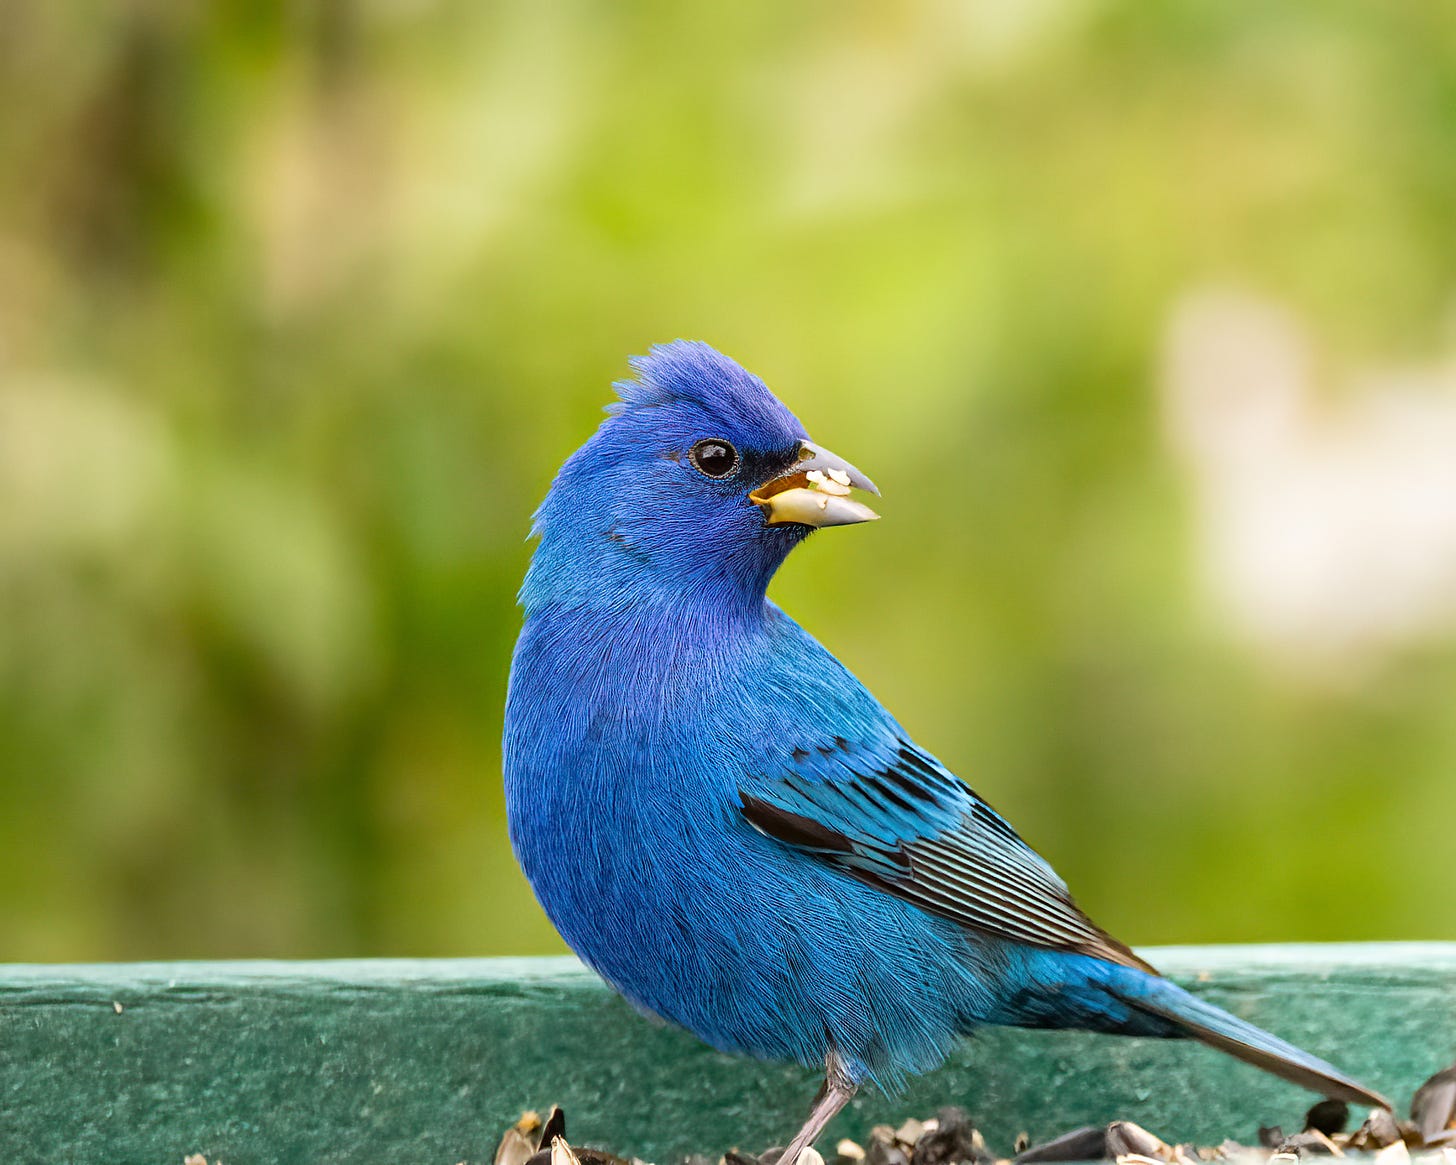 A bright blue indigo bunting perches on the birdfeeder eating seeds.